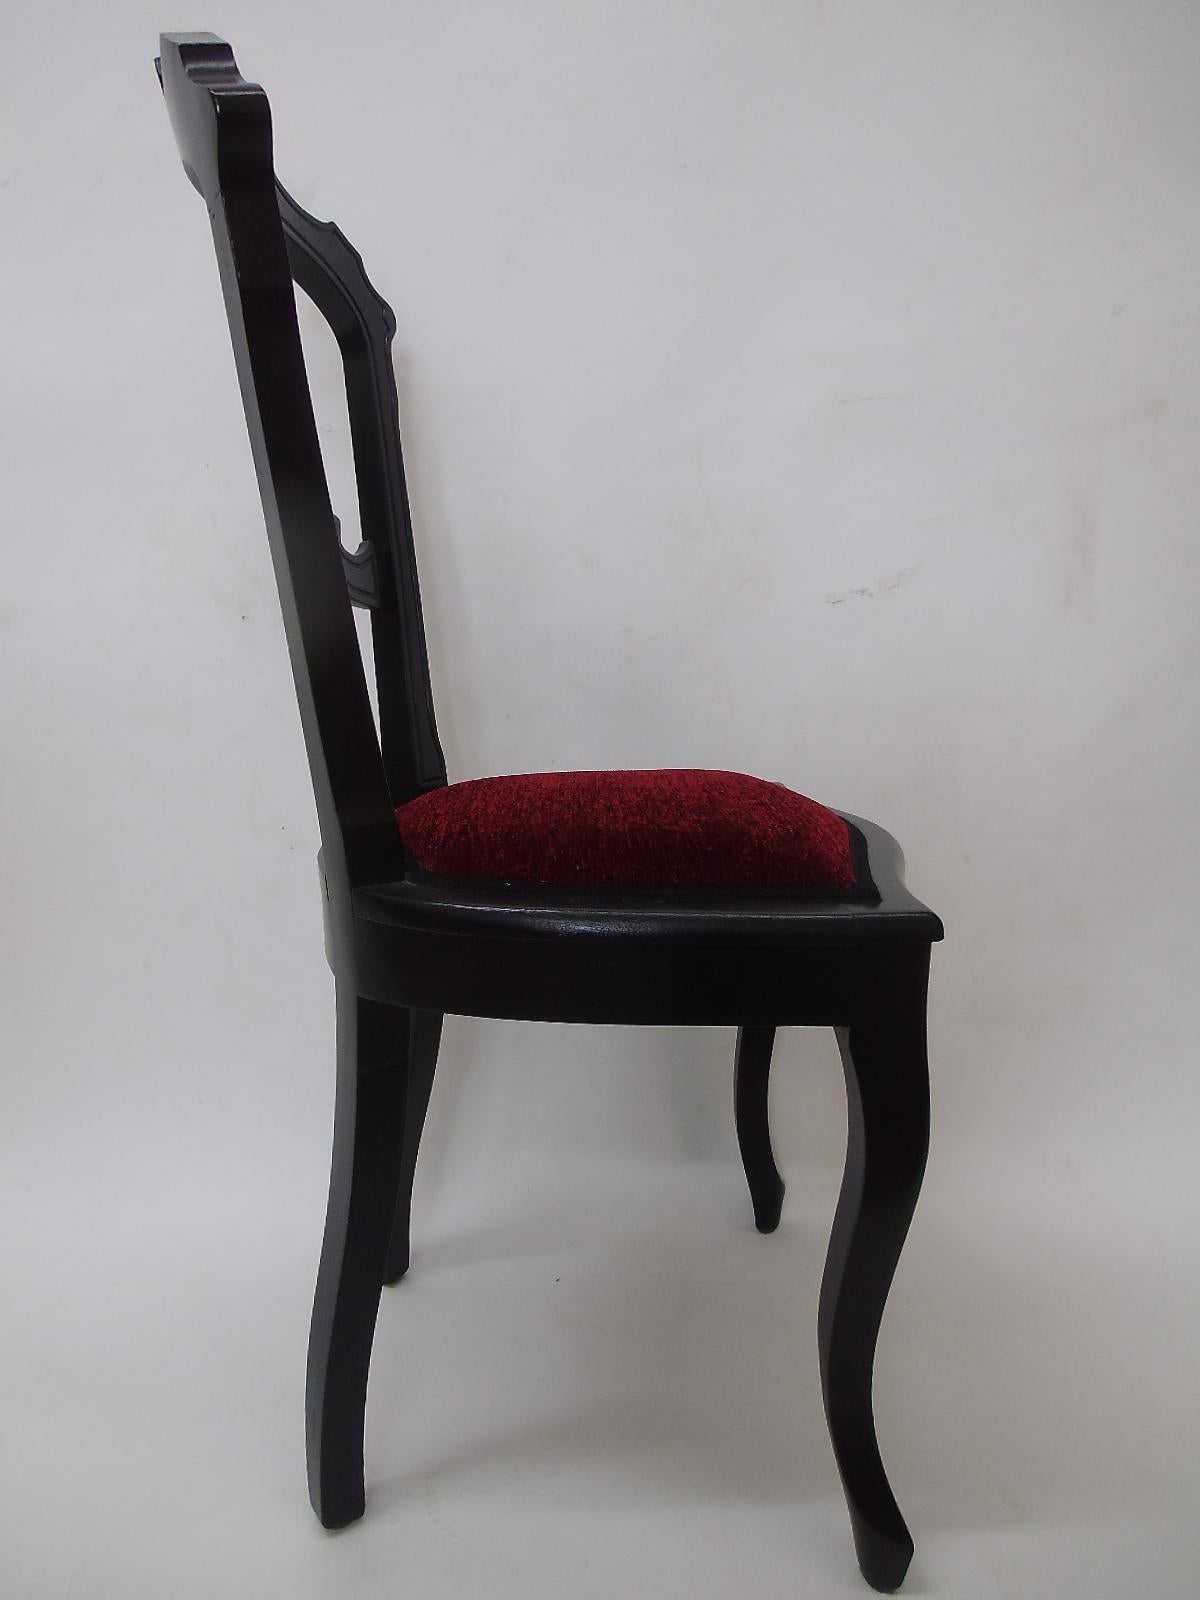 Mid-19th Century Baroque Finca Chair in Stained Black with New Red Upholstery For Sale